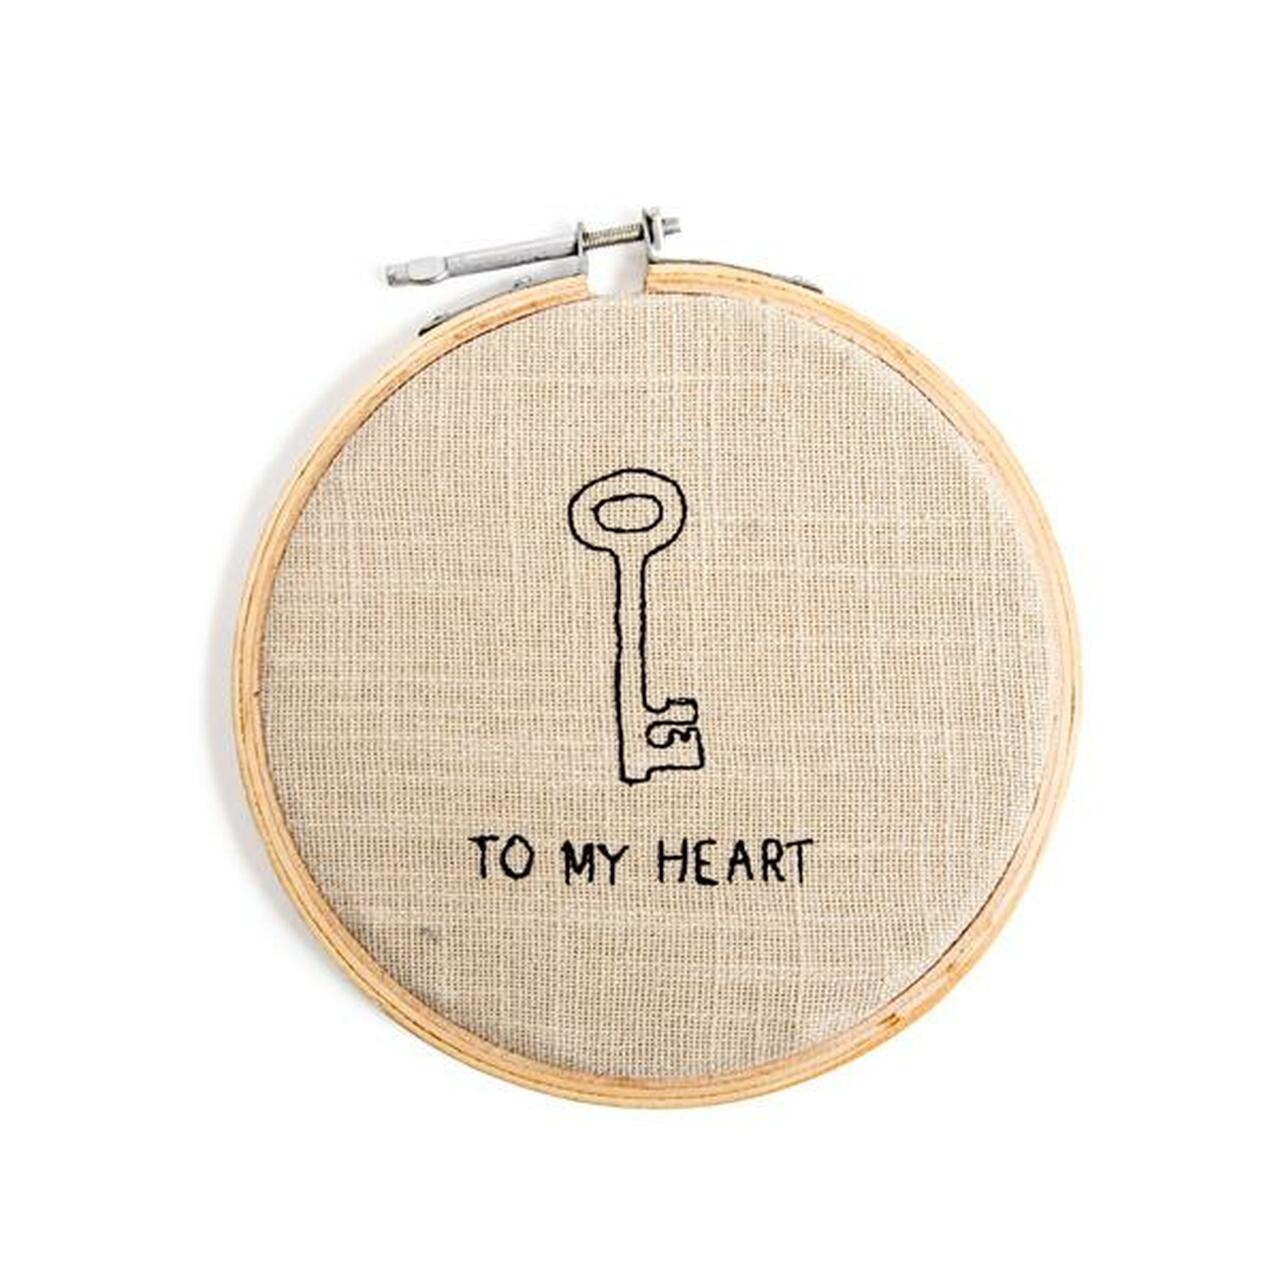 Key To My Heart - Embroidery Hoop